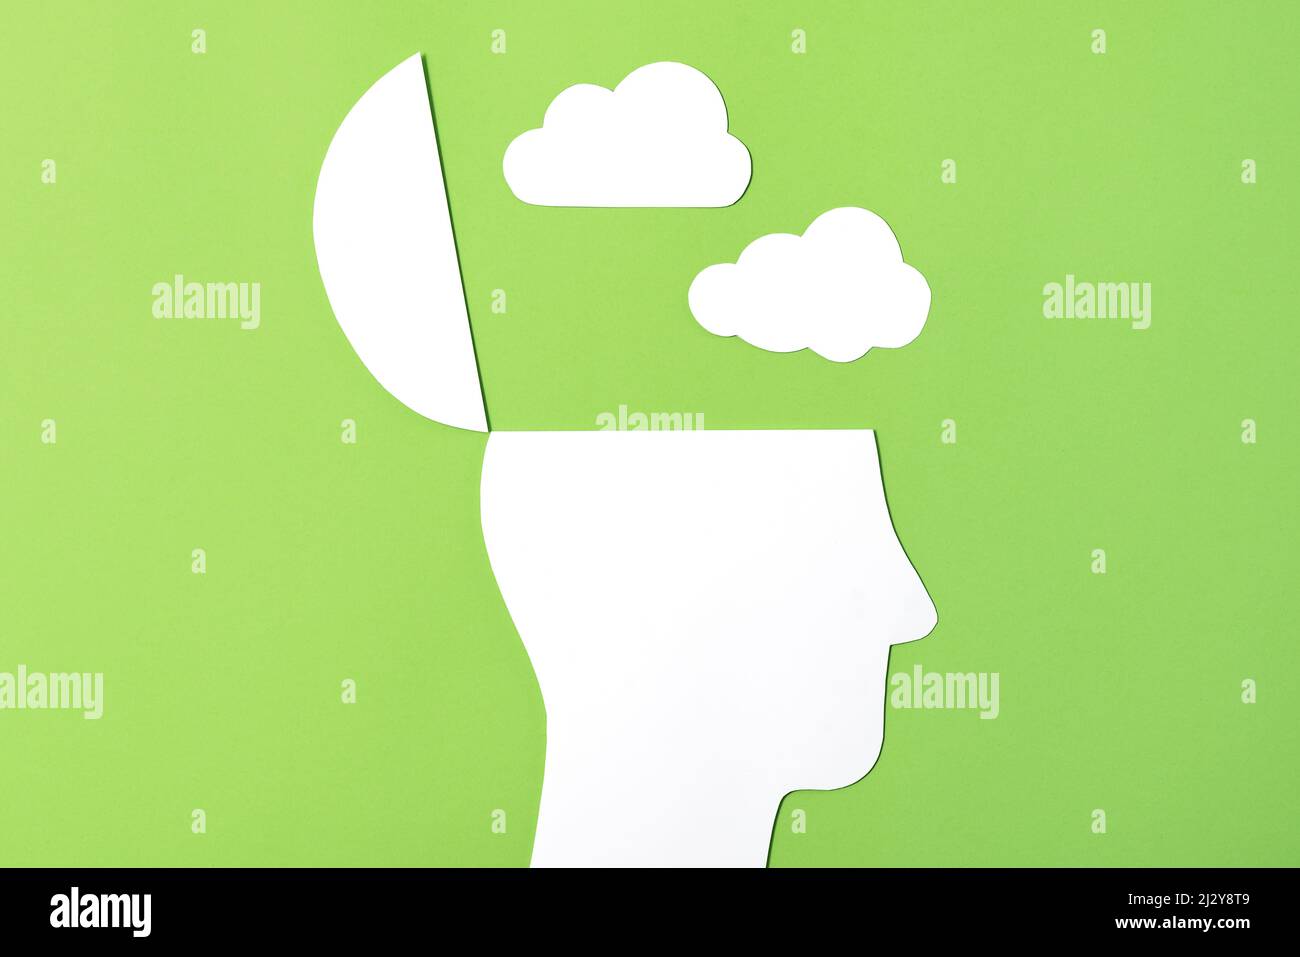 Dark Thoughts Concept, Paper Cut out Open head with paper cut out clouds above Stock Photo